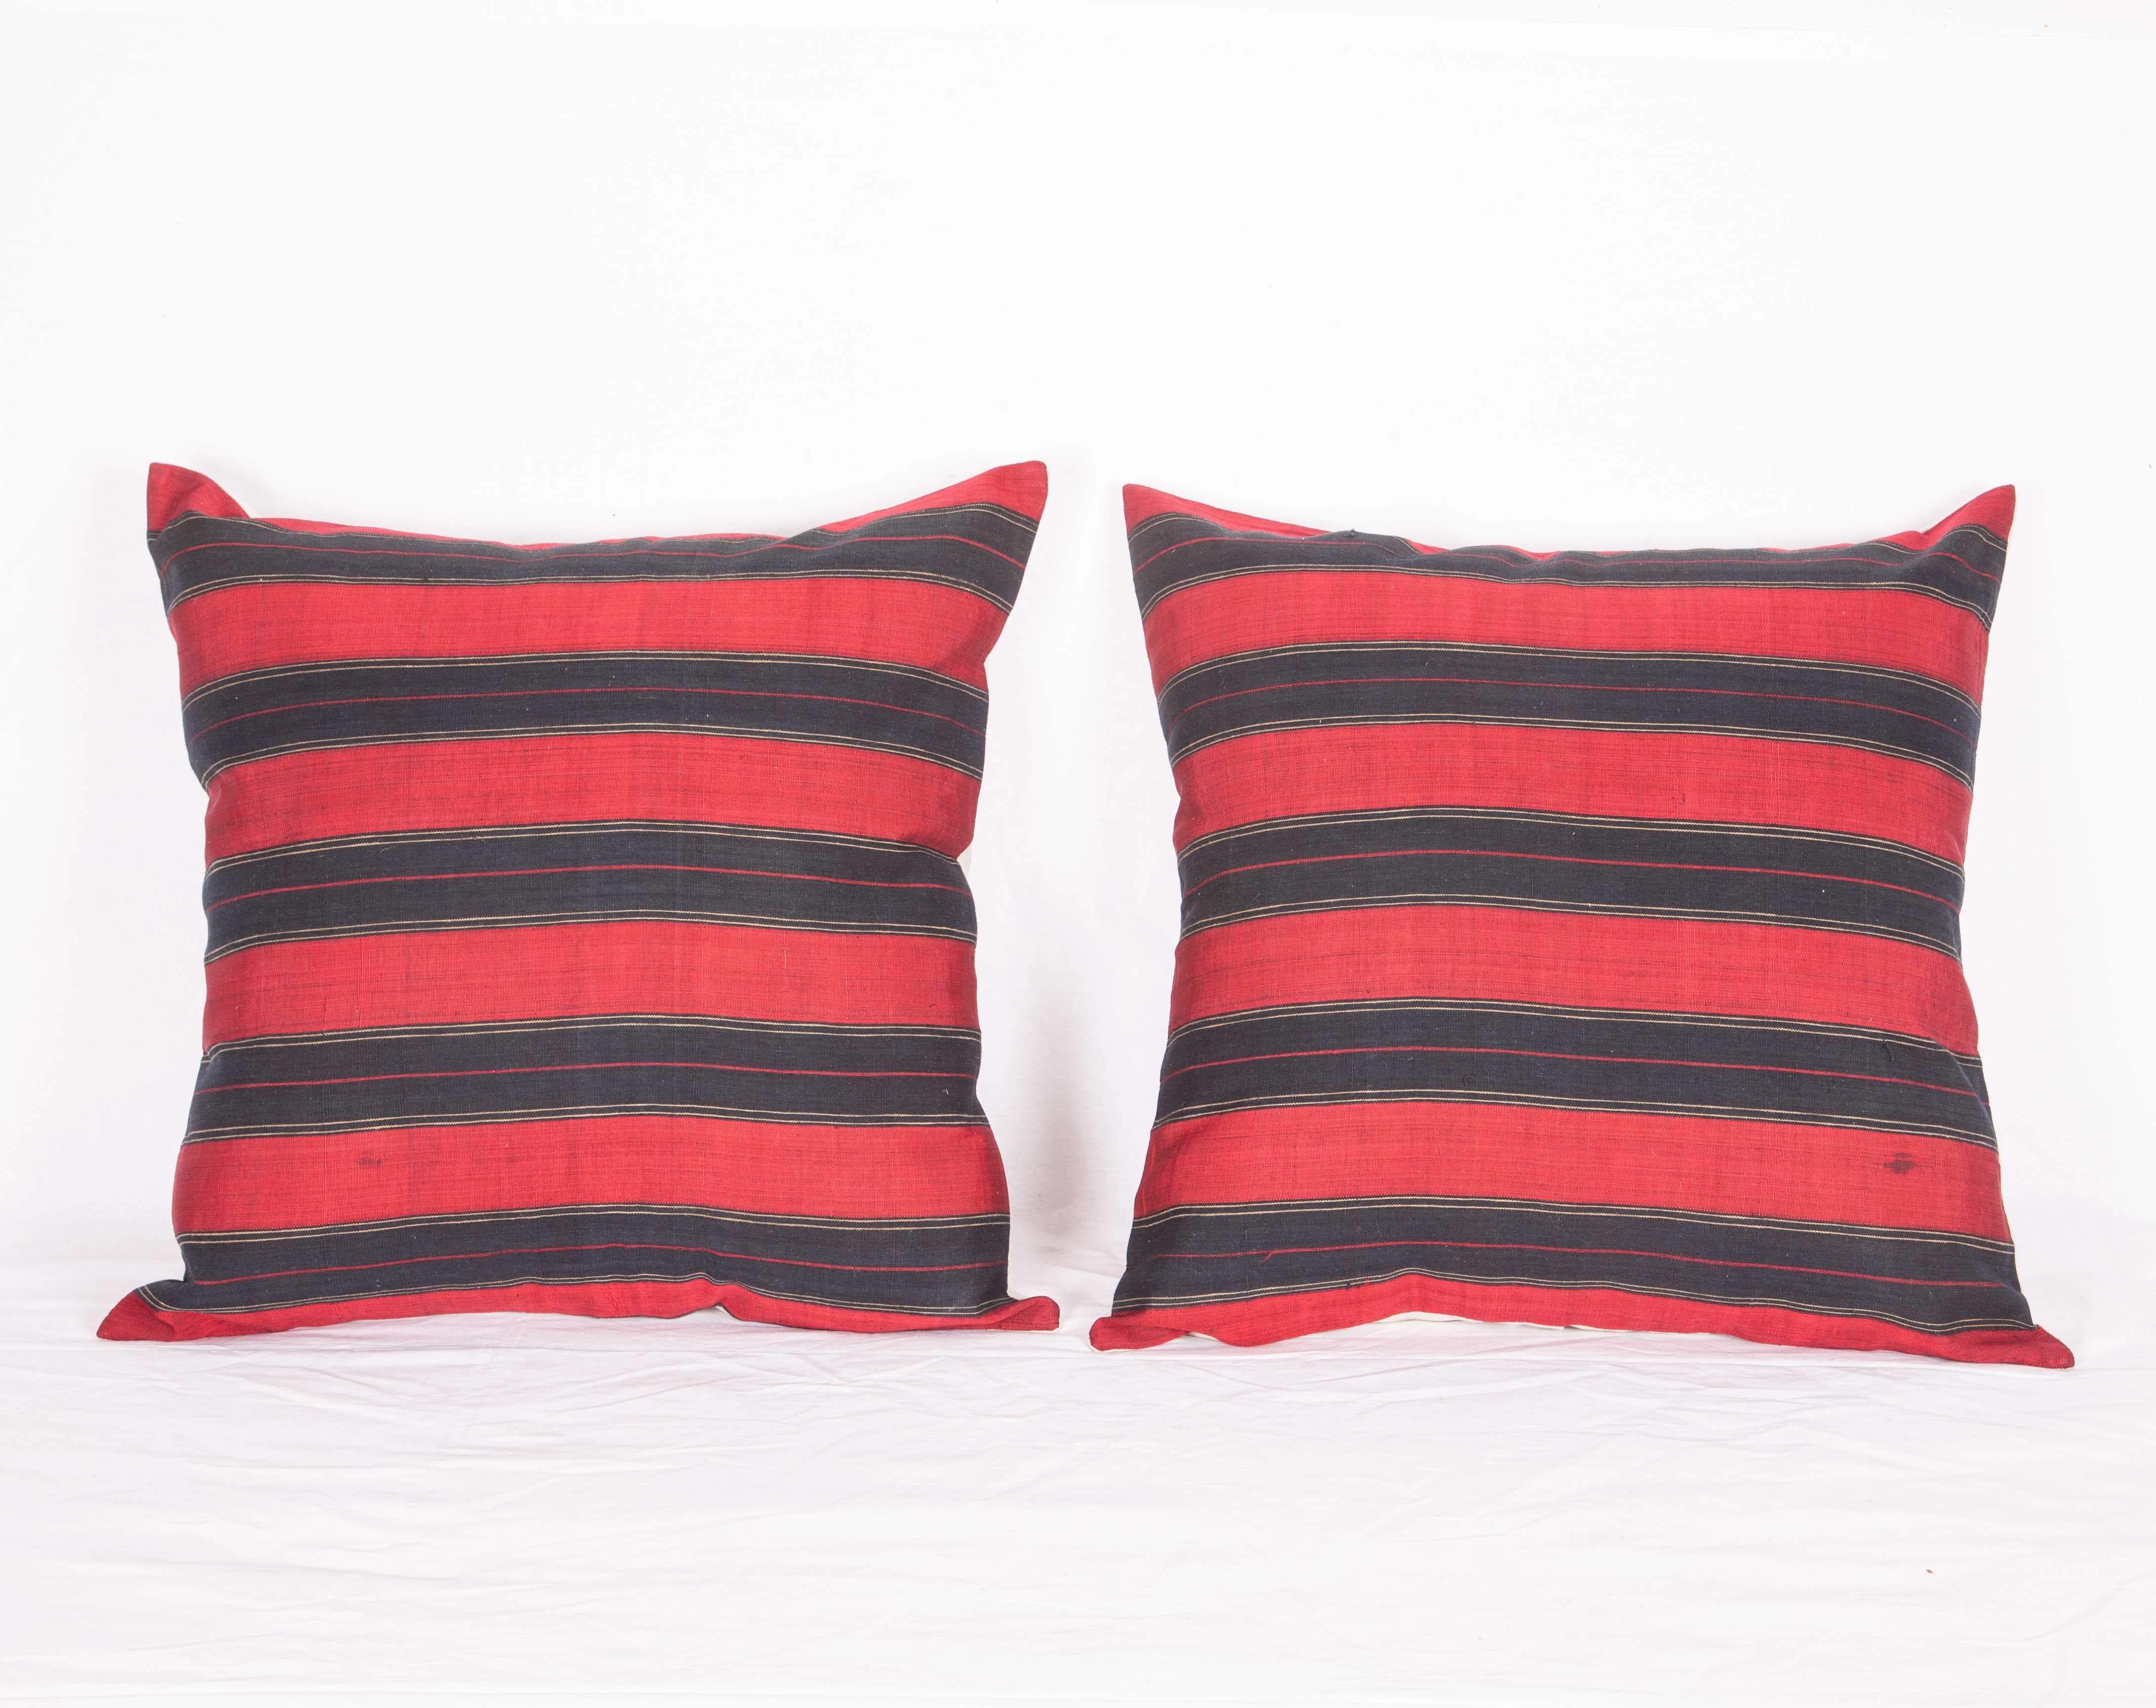 Hand-Woven Pillow Cases Fashioned from an Afghan Waziri Shawl, Early 20th Century For Sale